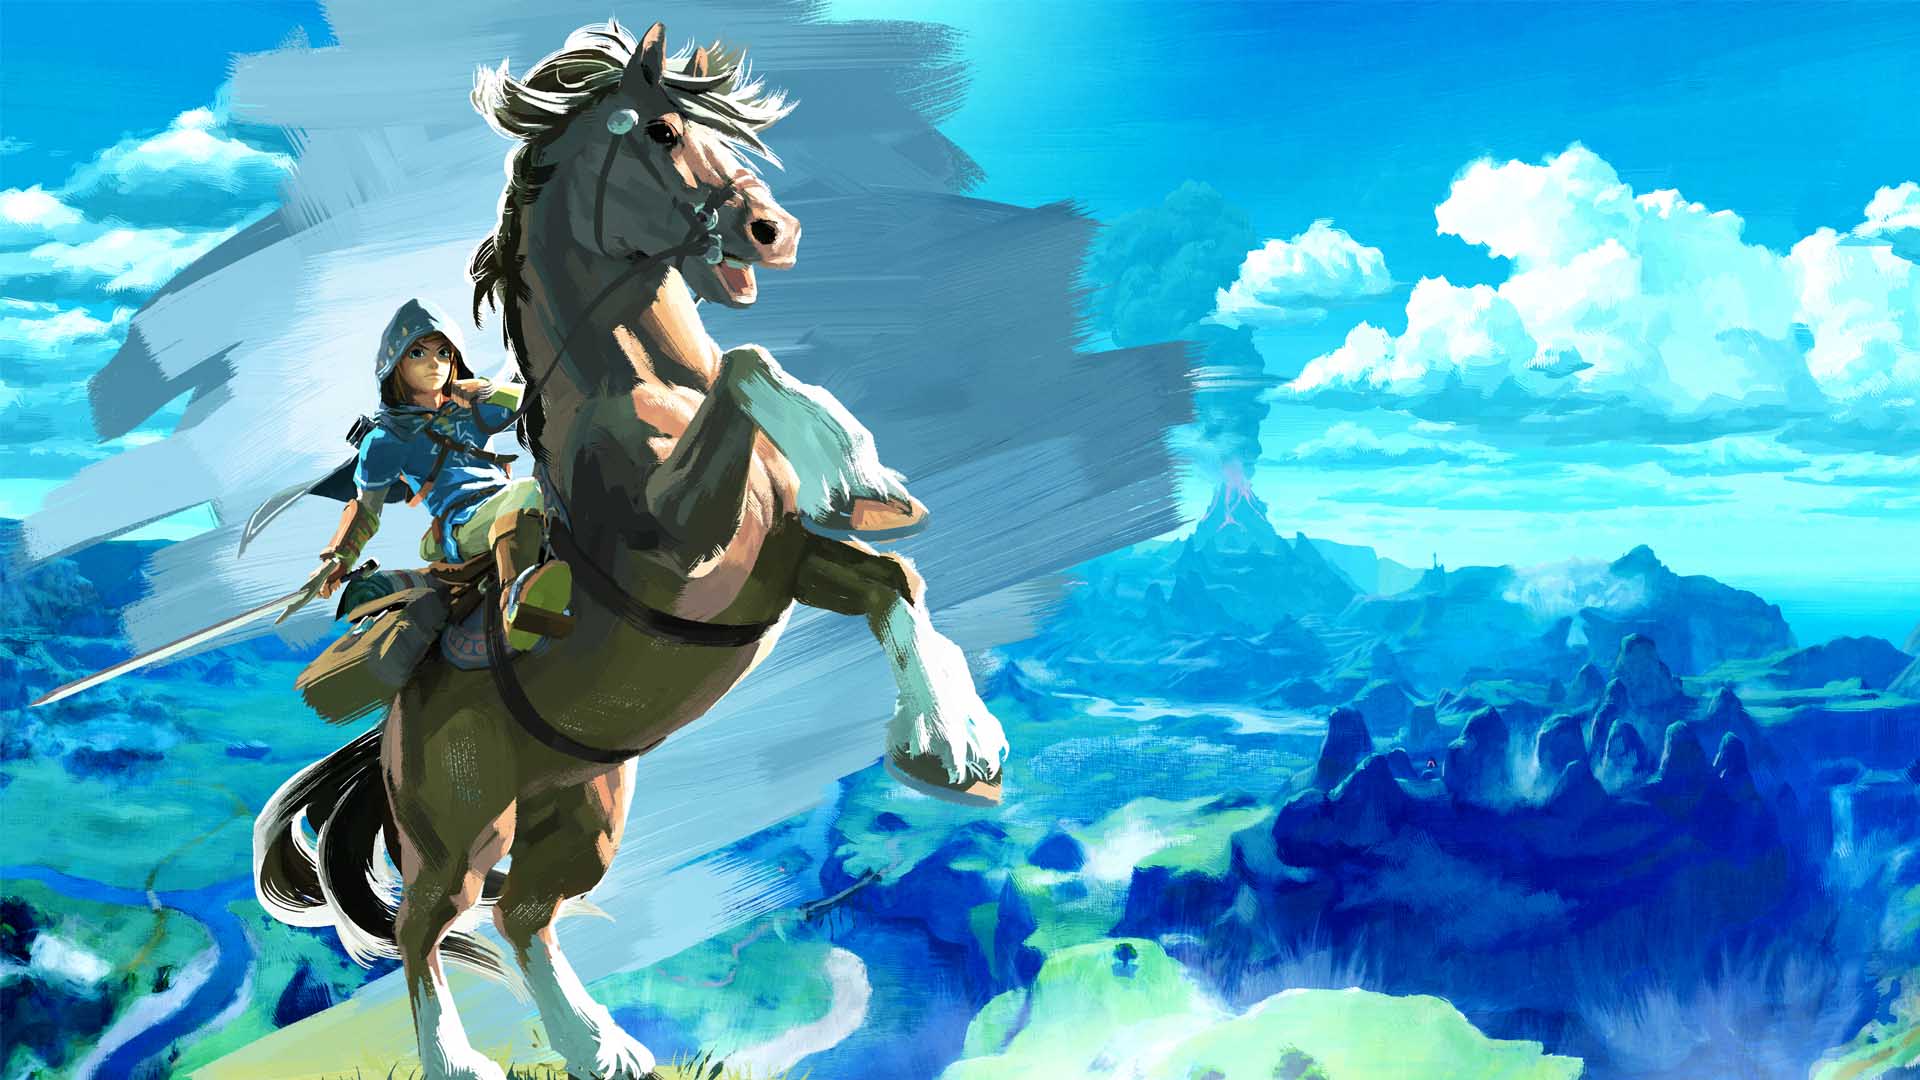 breath of the wild wallpaper,action adventure game,cg artwork,sky,games,illustration